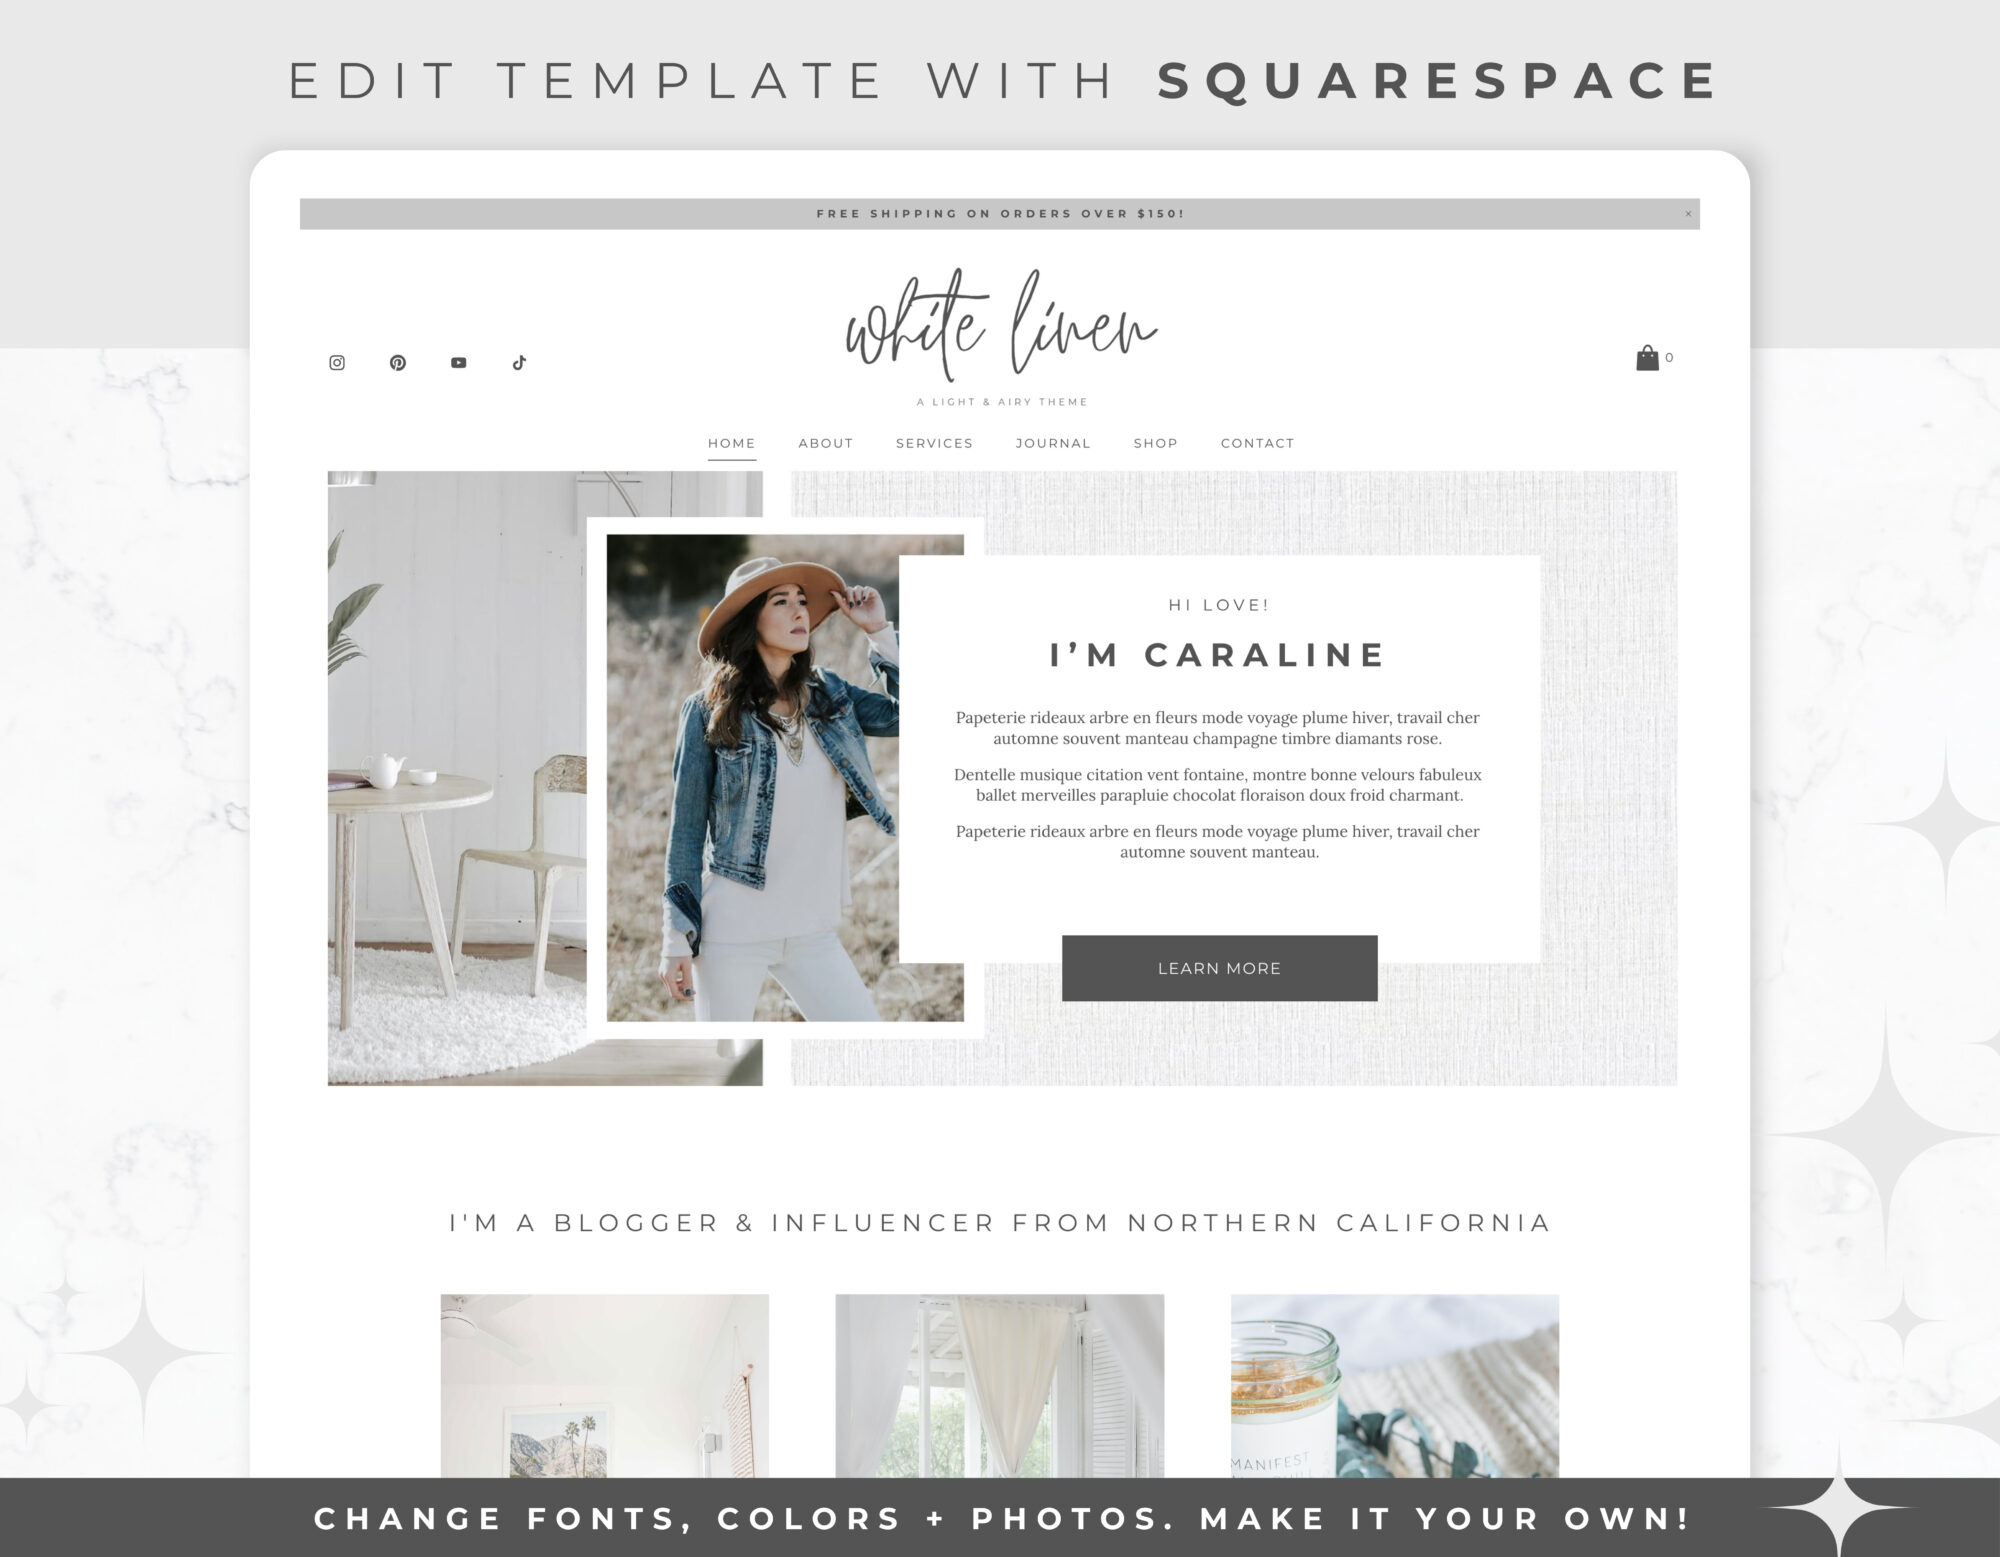 Website Template for Squarespace – White Linen